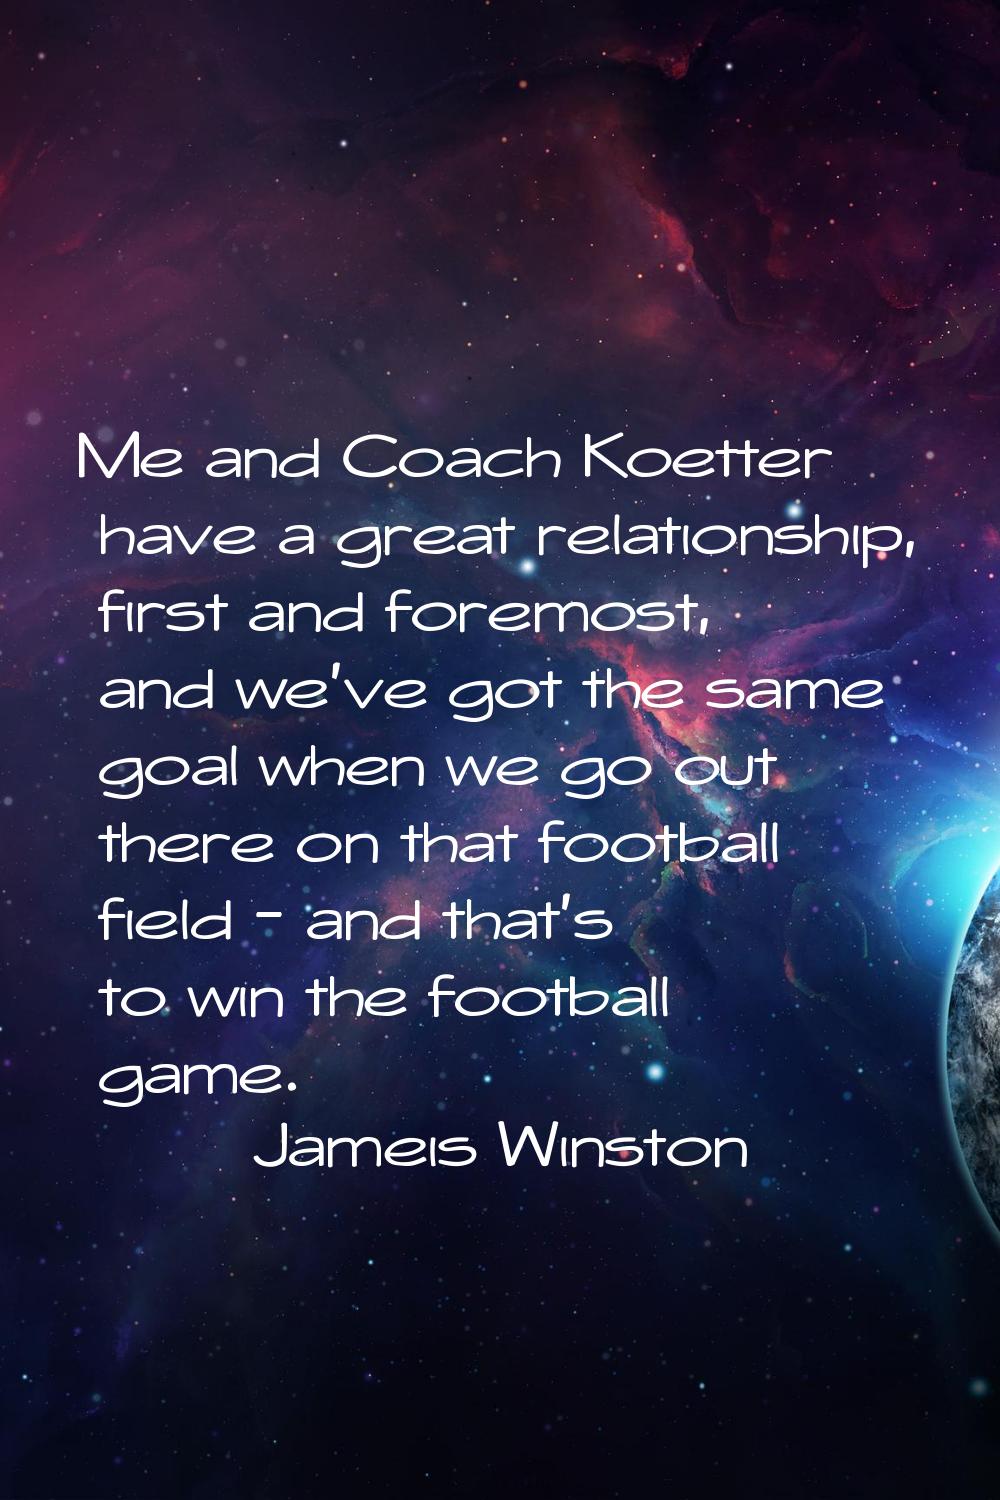 Me and Coach Koetter have a great relationship, first and foremost, and we've got the same goal whe